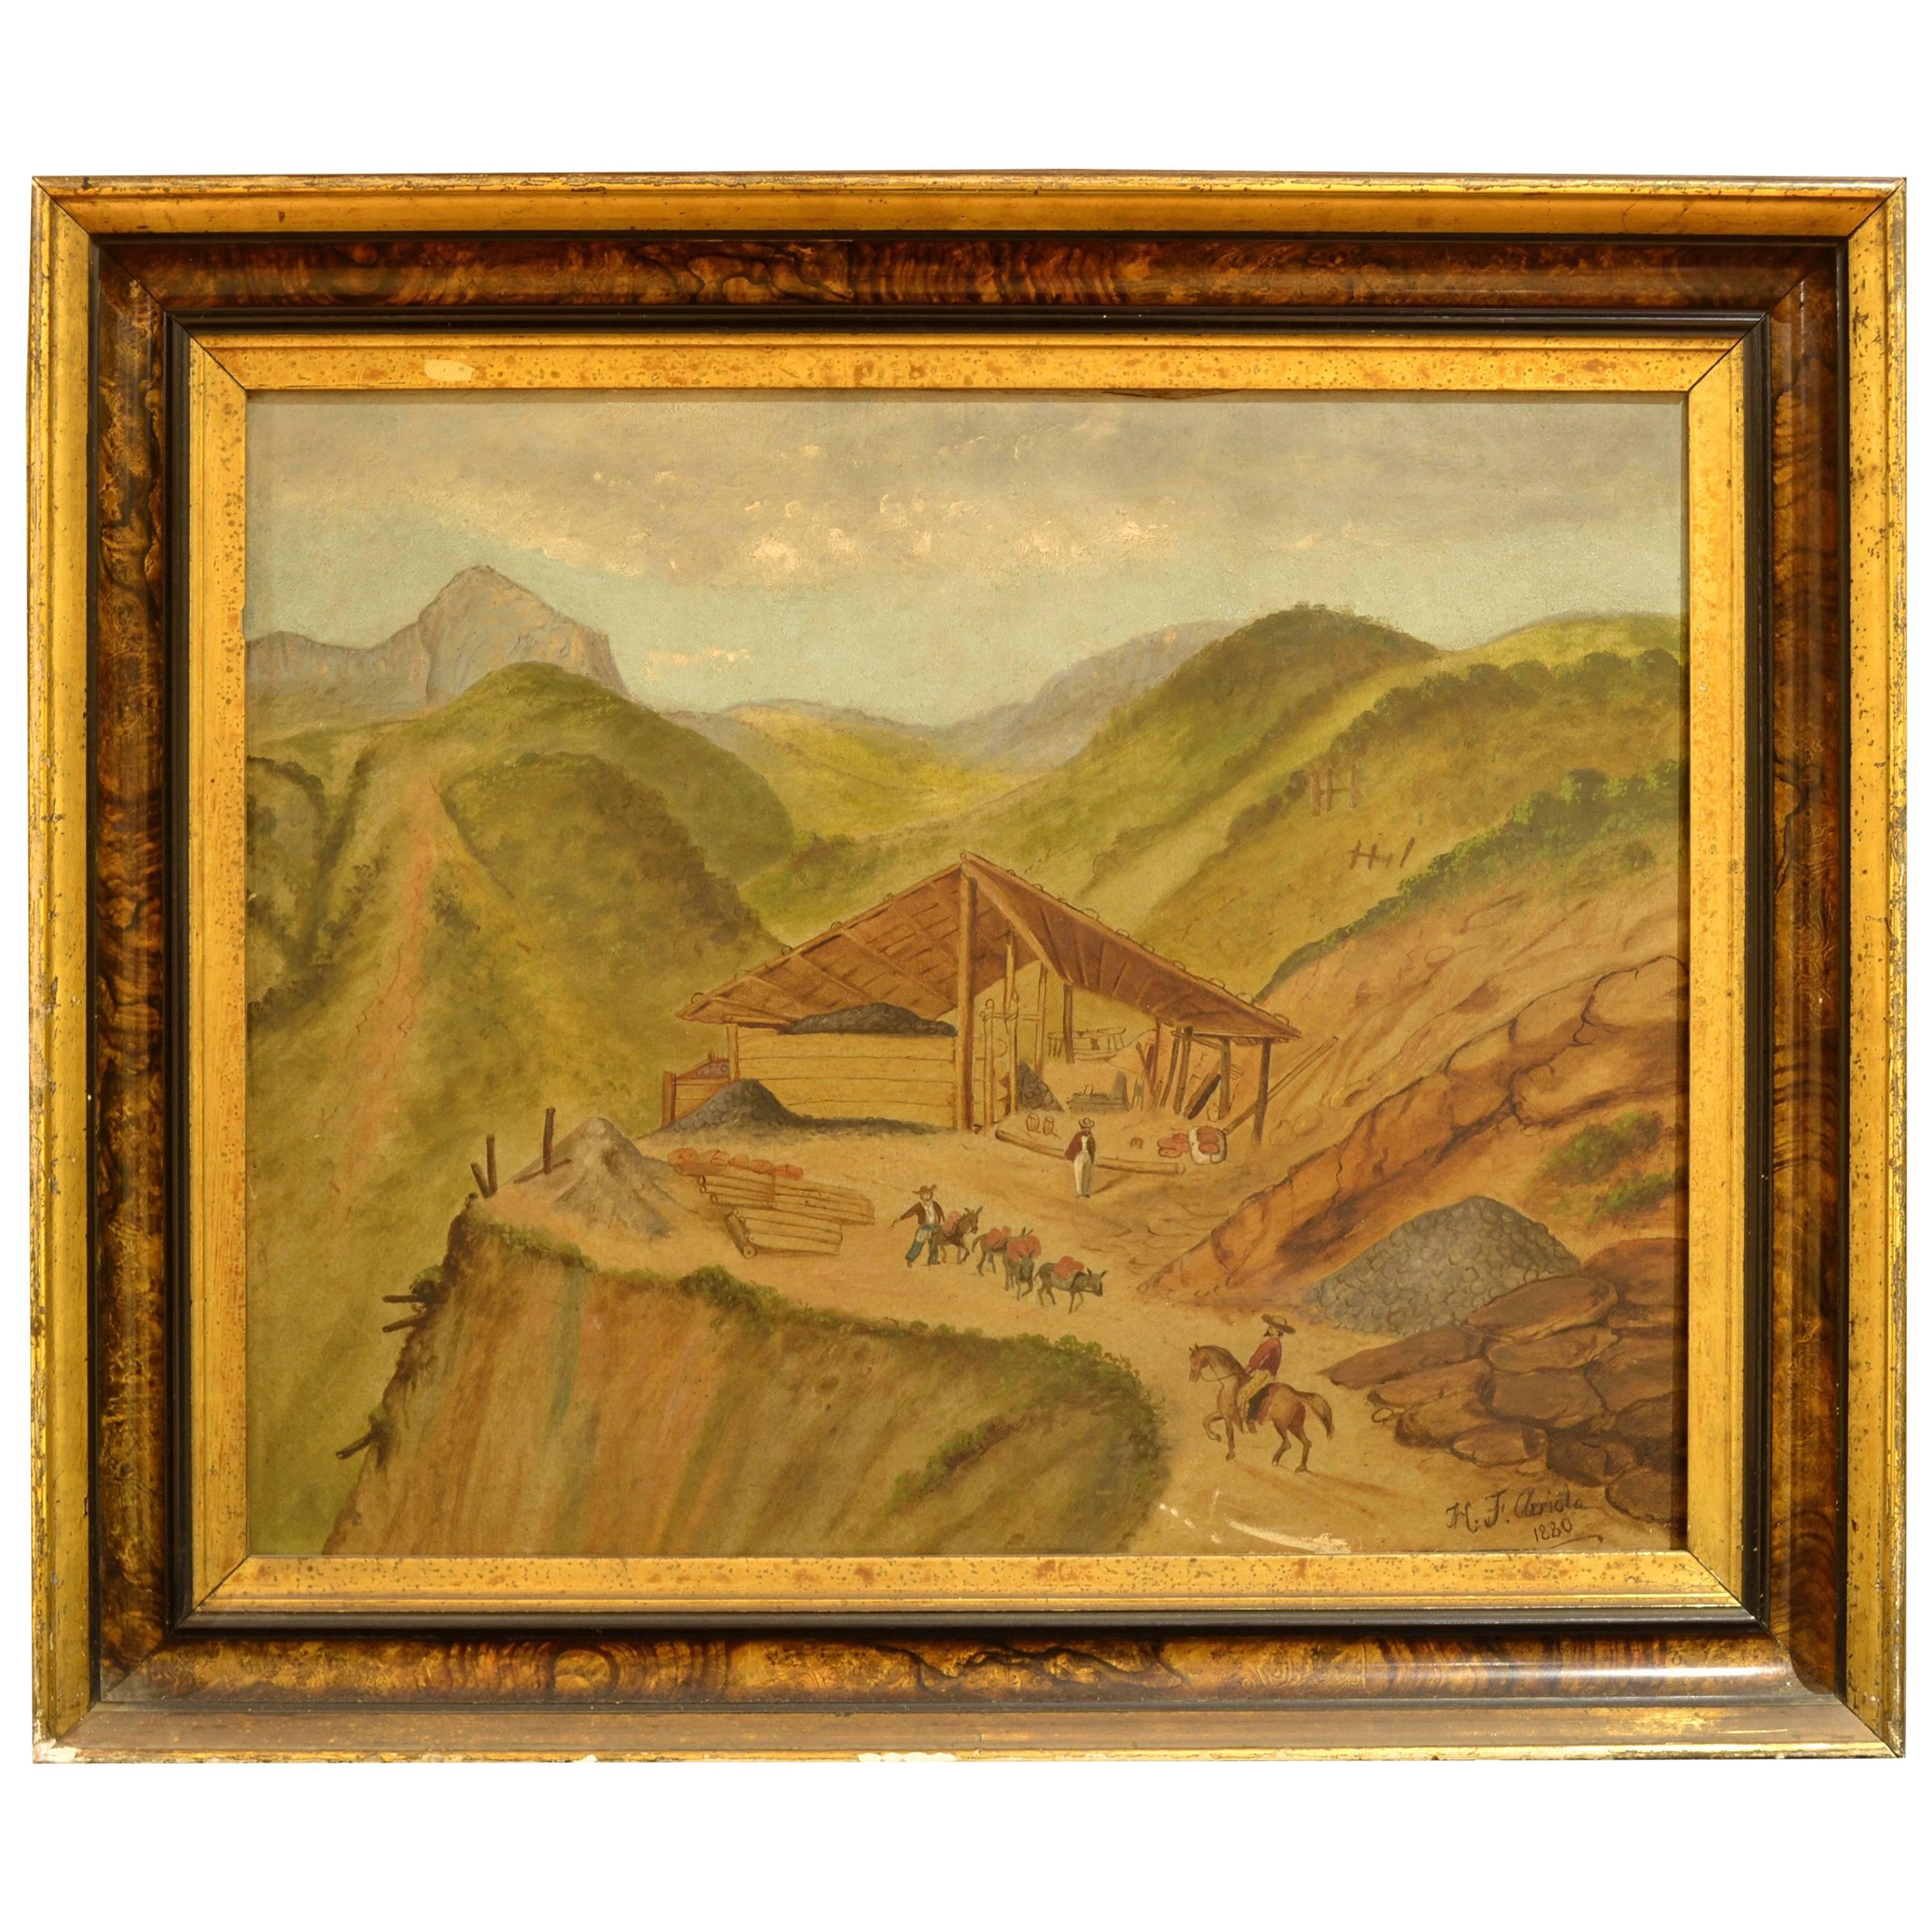 Mine Landscape by H. F. Arriola, dated 1880